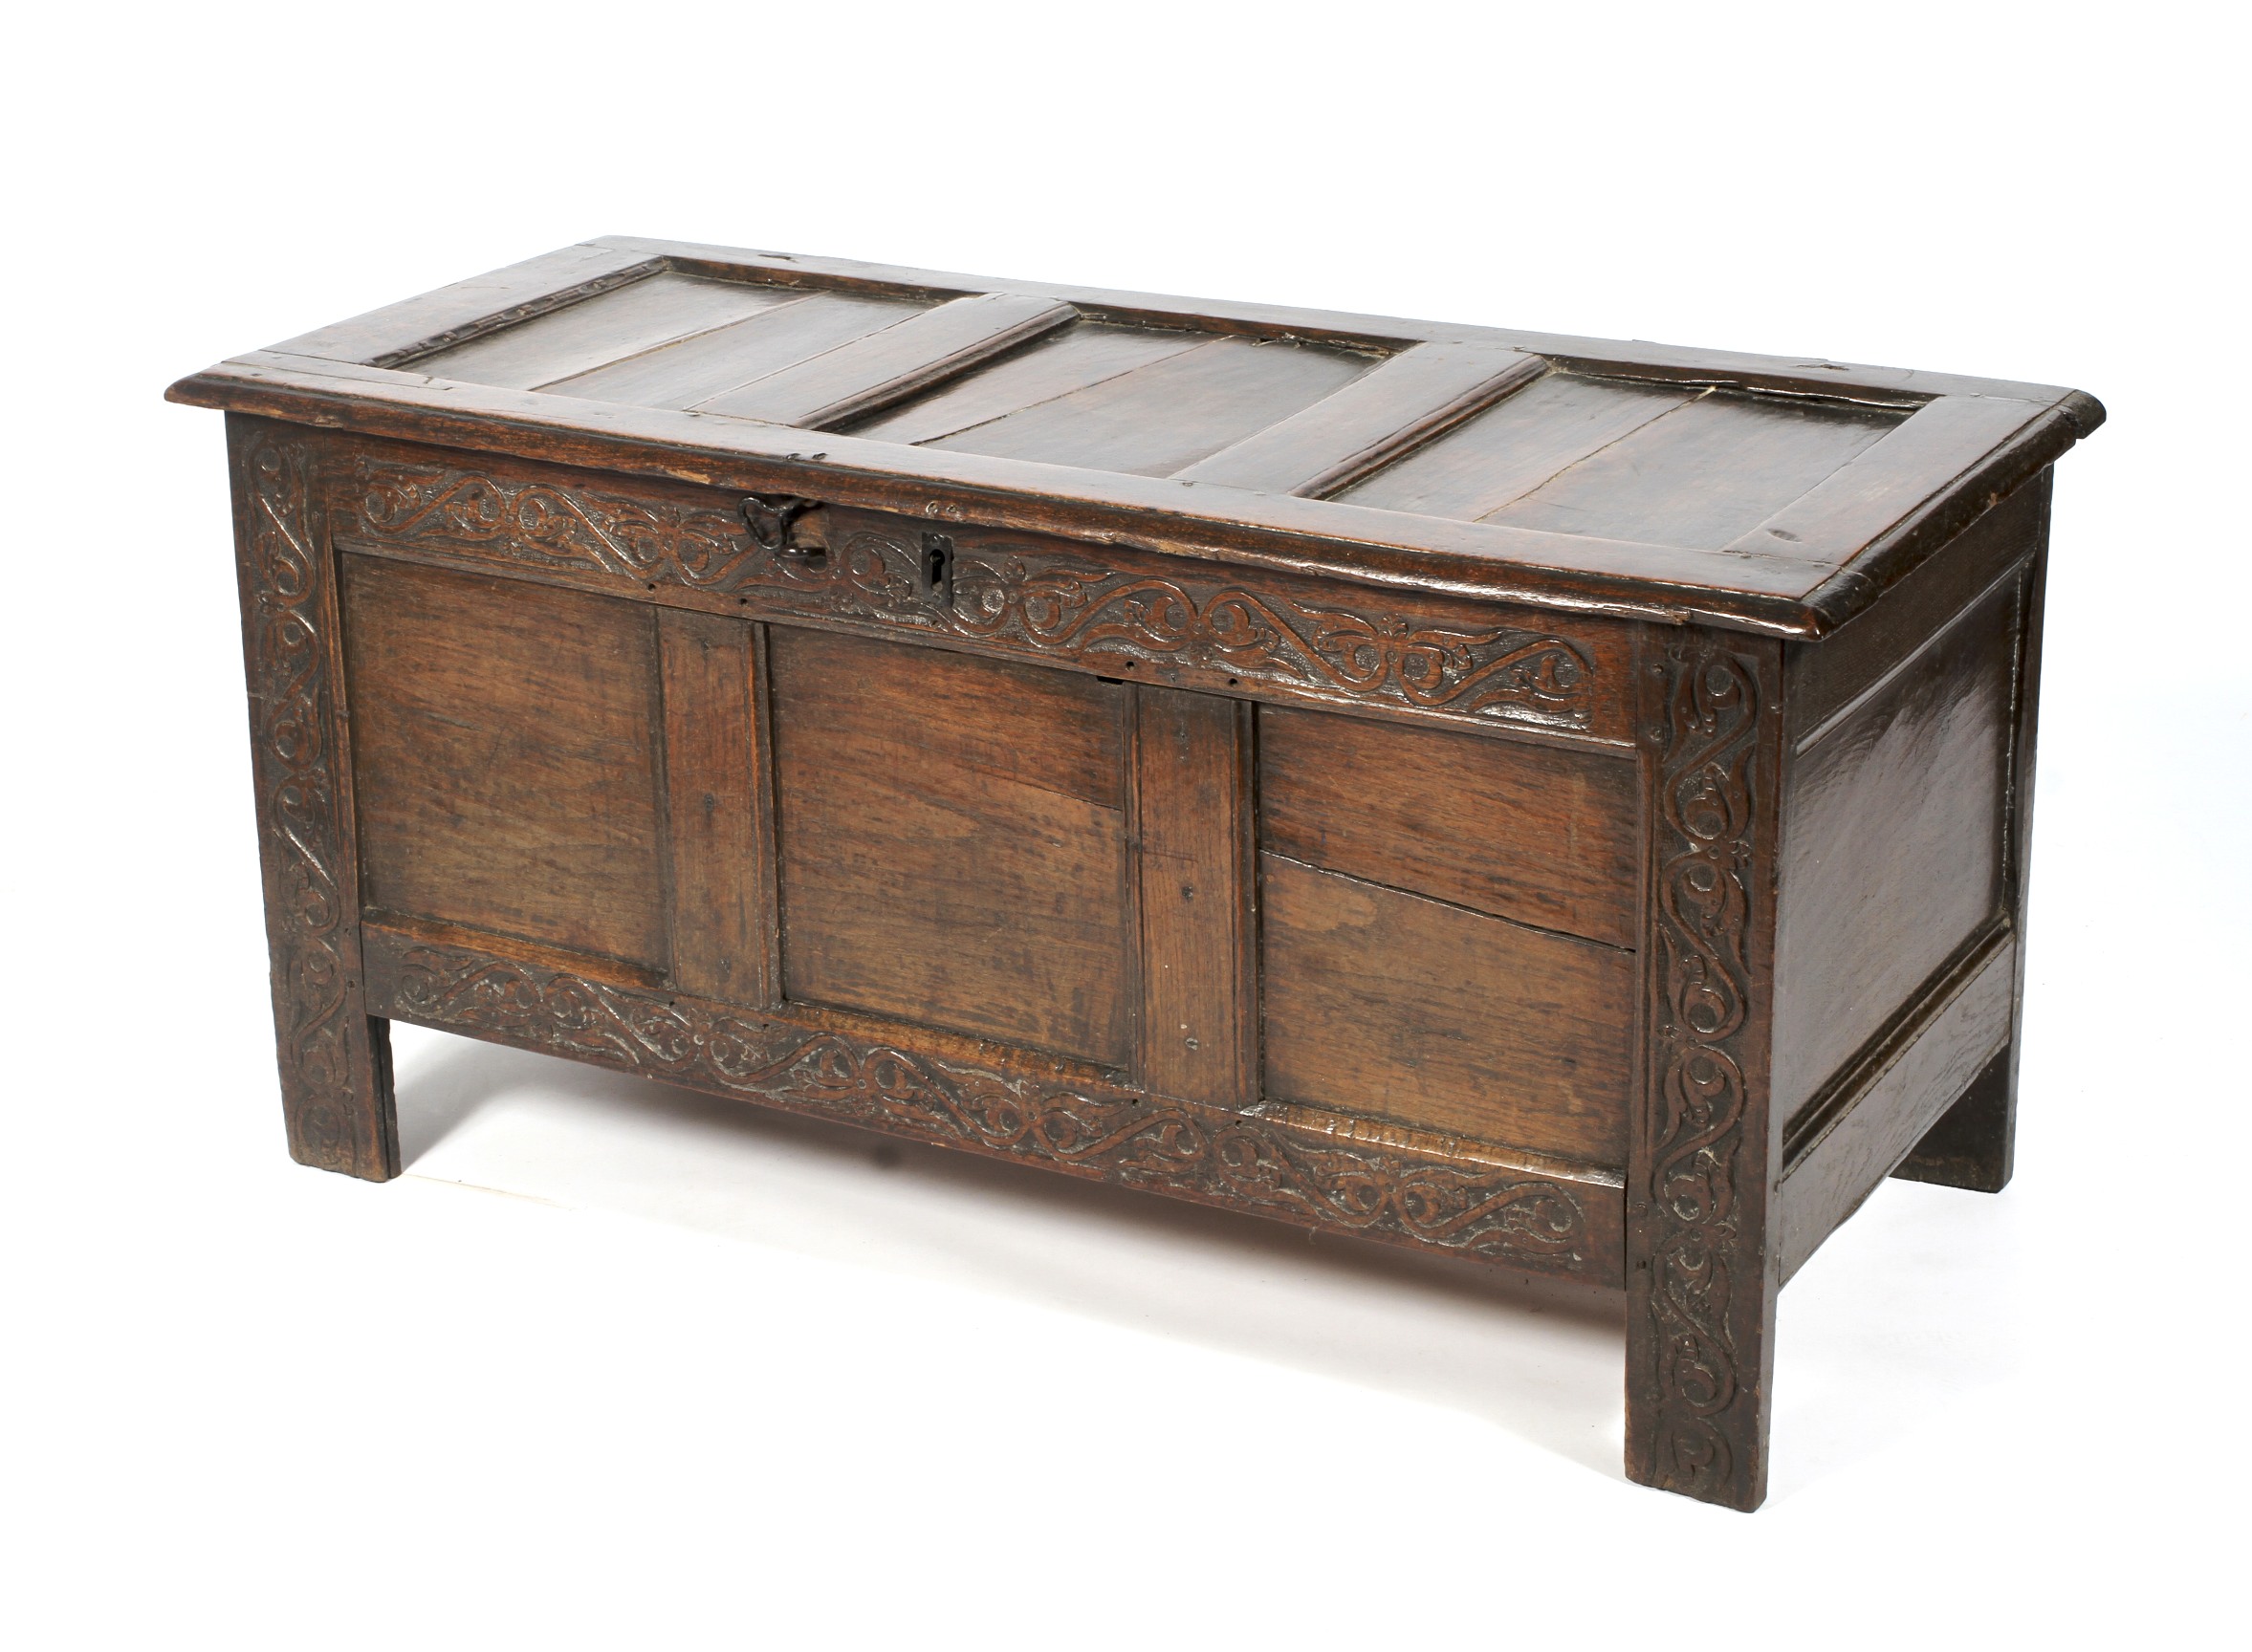 A panelled and carved oak coffer, late 17th century.